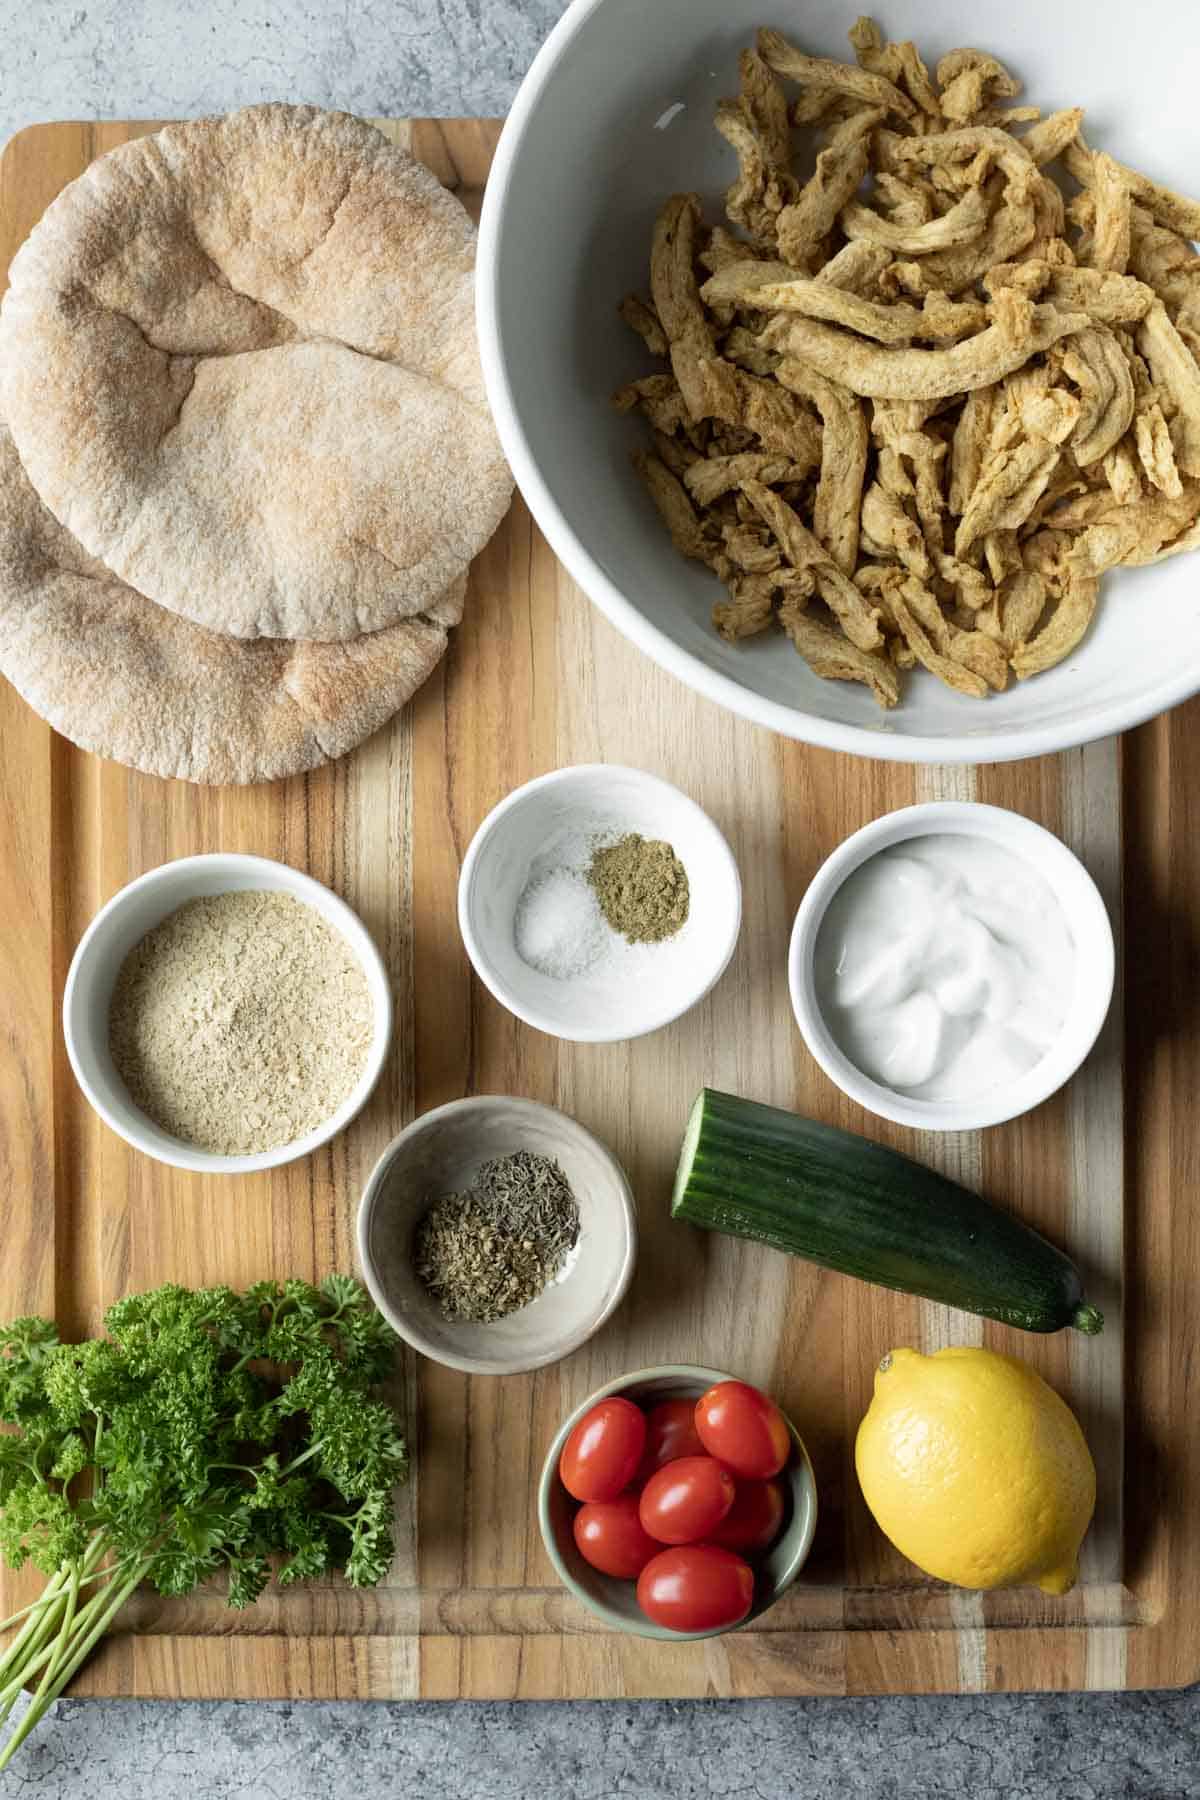 A photo of the ingredients needed for Mediterranean pita sandwiches laid out on a wood cutting board.